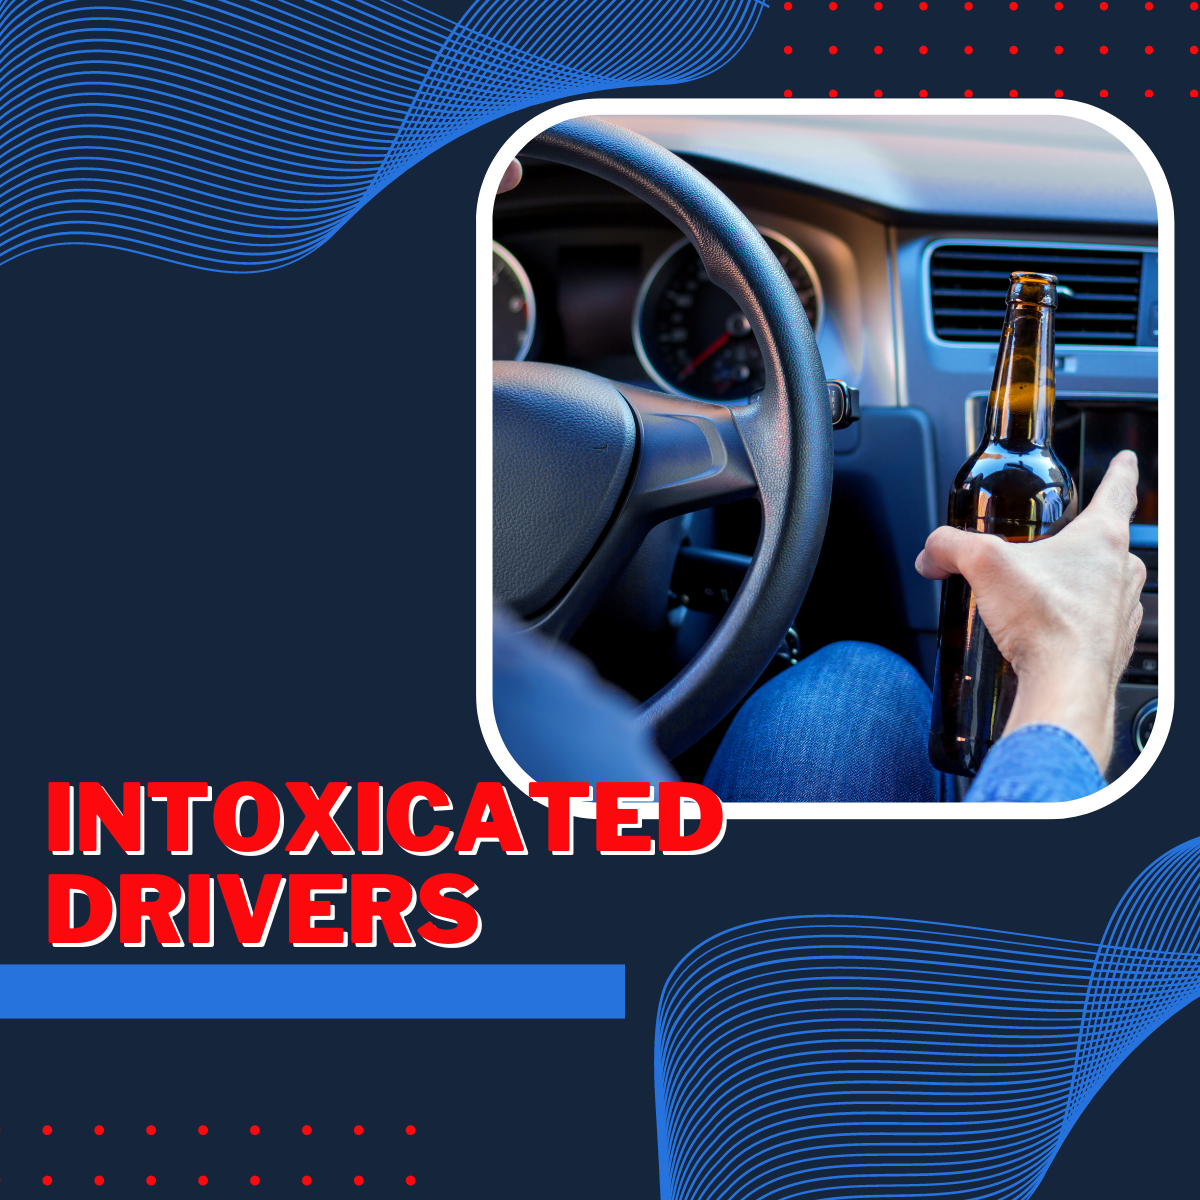 intoxicated drivers lawsuit